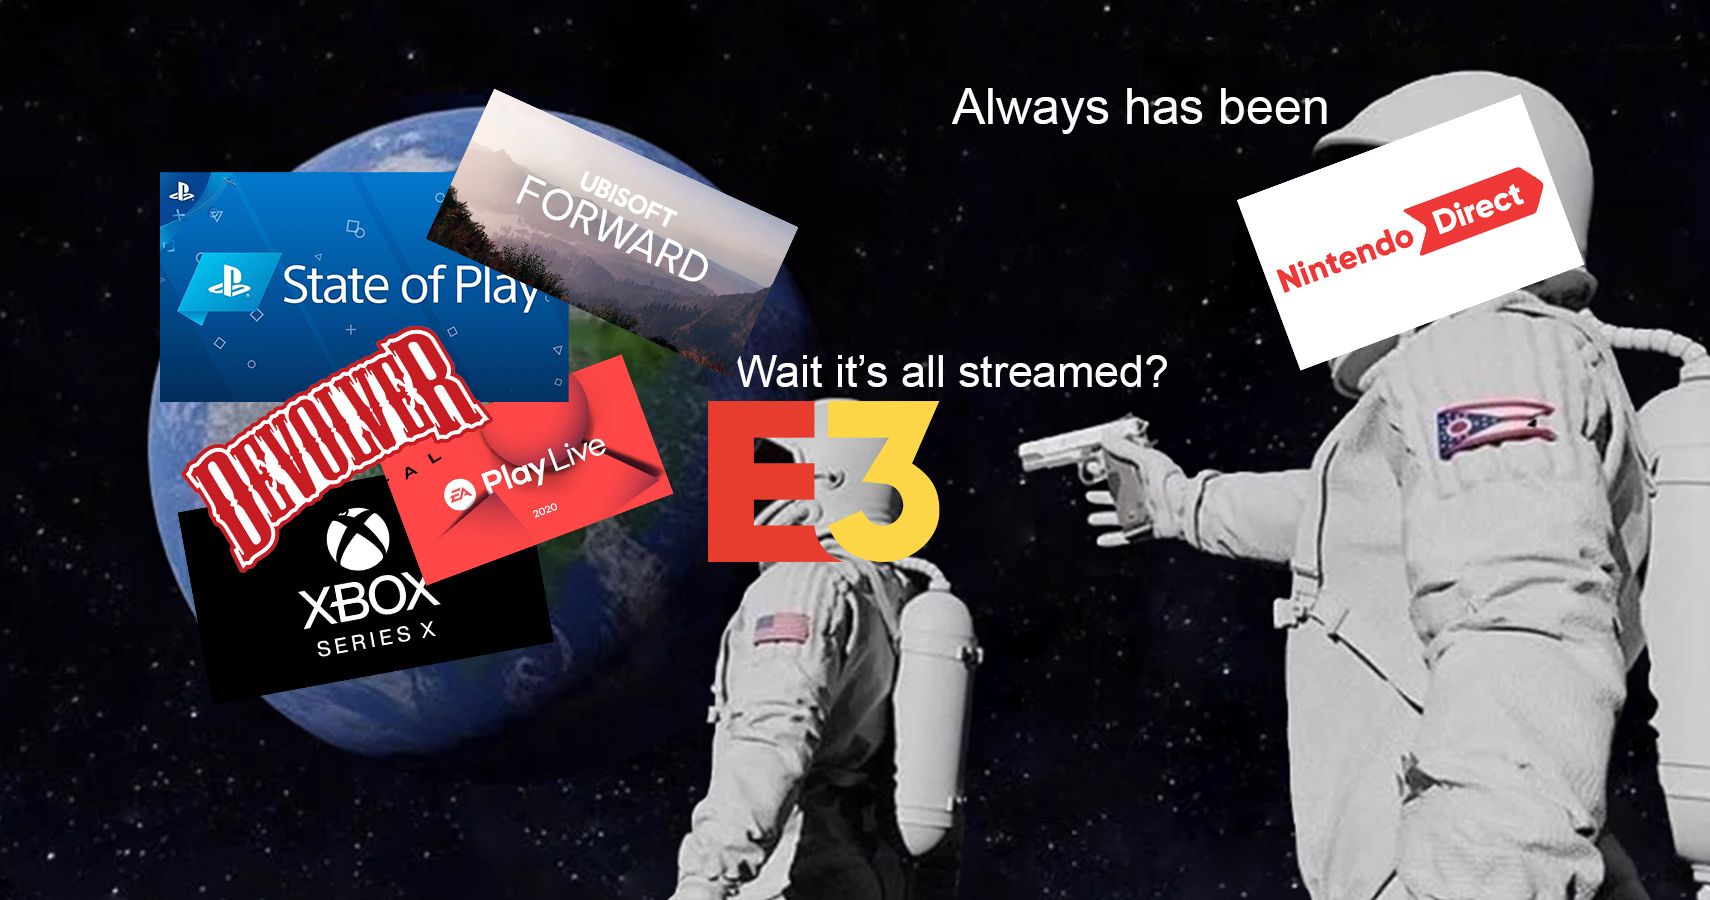 Always has been astronaut meme but with E3 and digital direct events